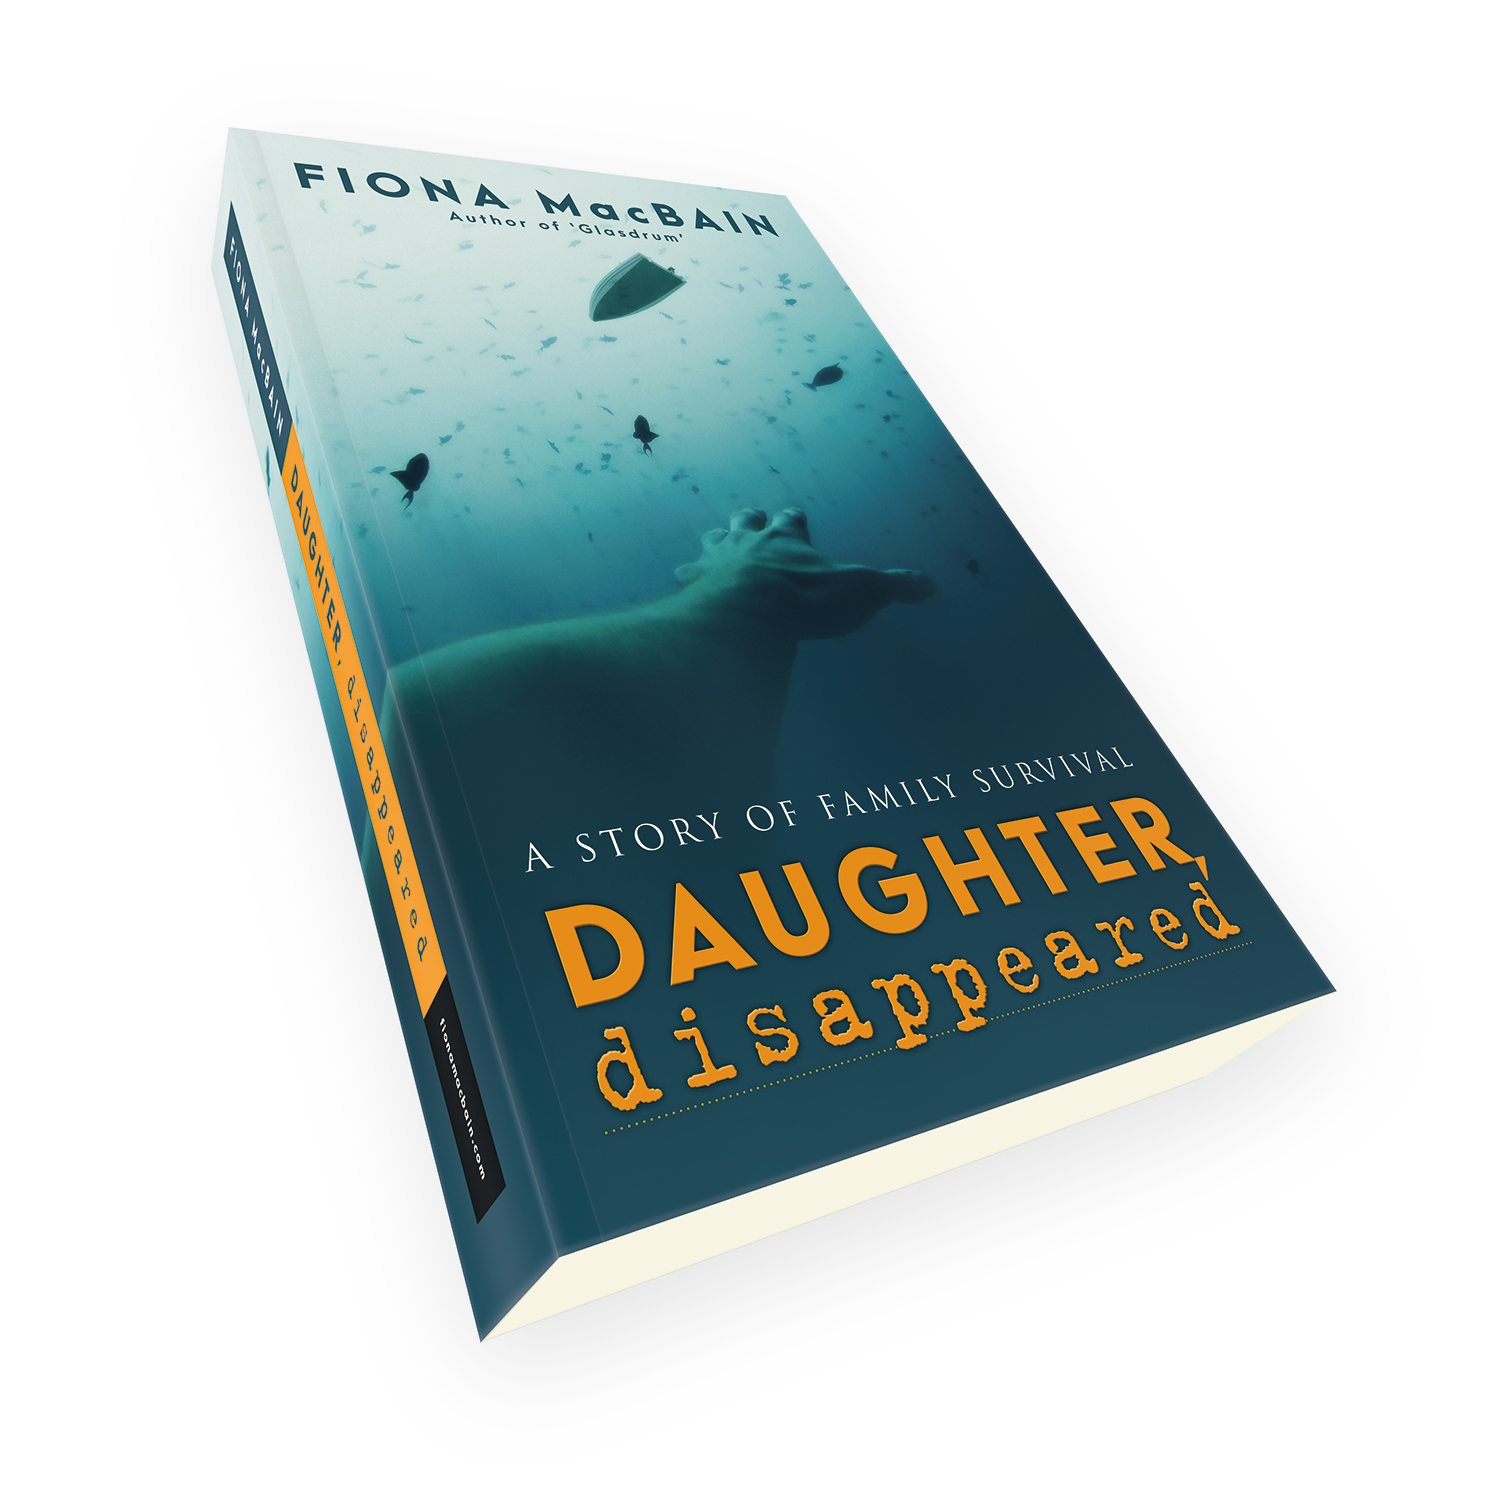 'Daughter, Disappeared' is a Tunisian-set dramatic novel, by author Fiona MacBain. The book cover & interior were designed by Mark Thomas, of coverness.com. To find out more about my book design services, please visit www.coverness.com.